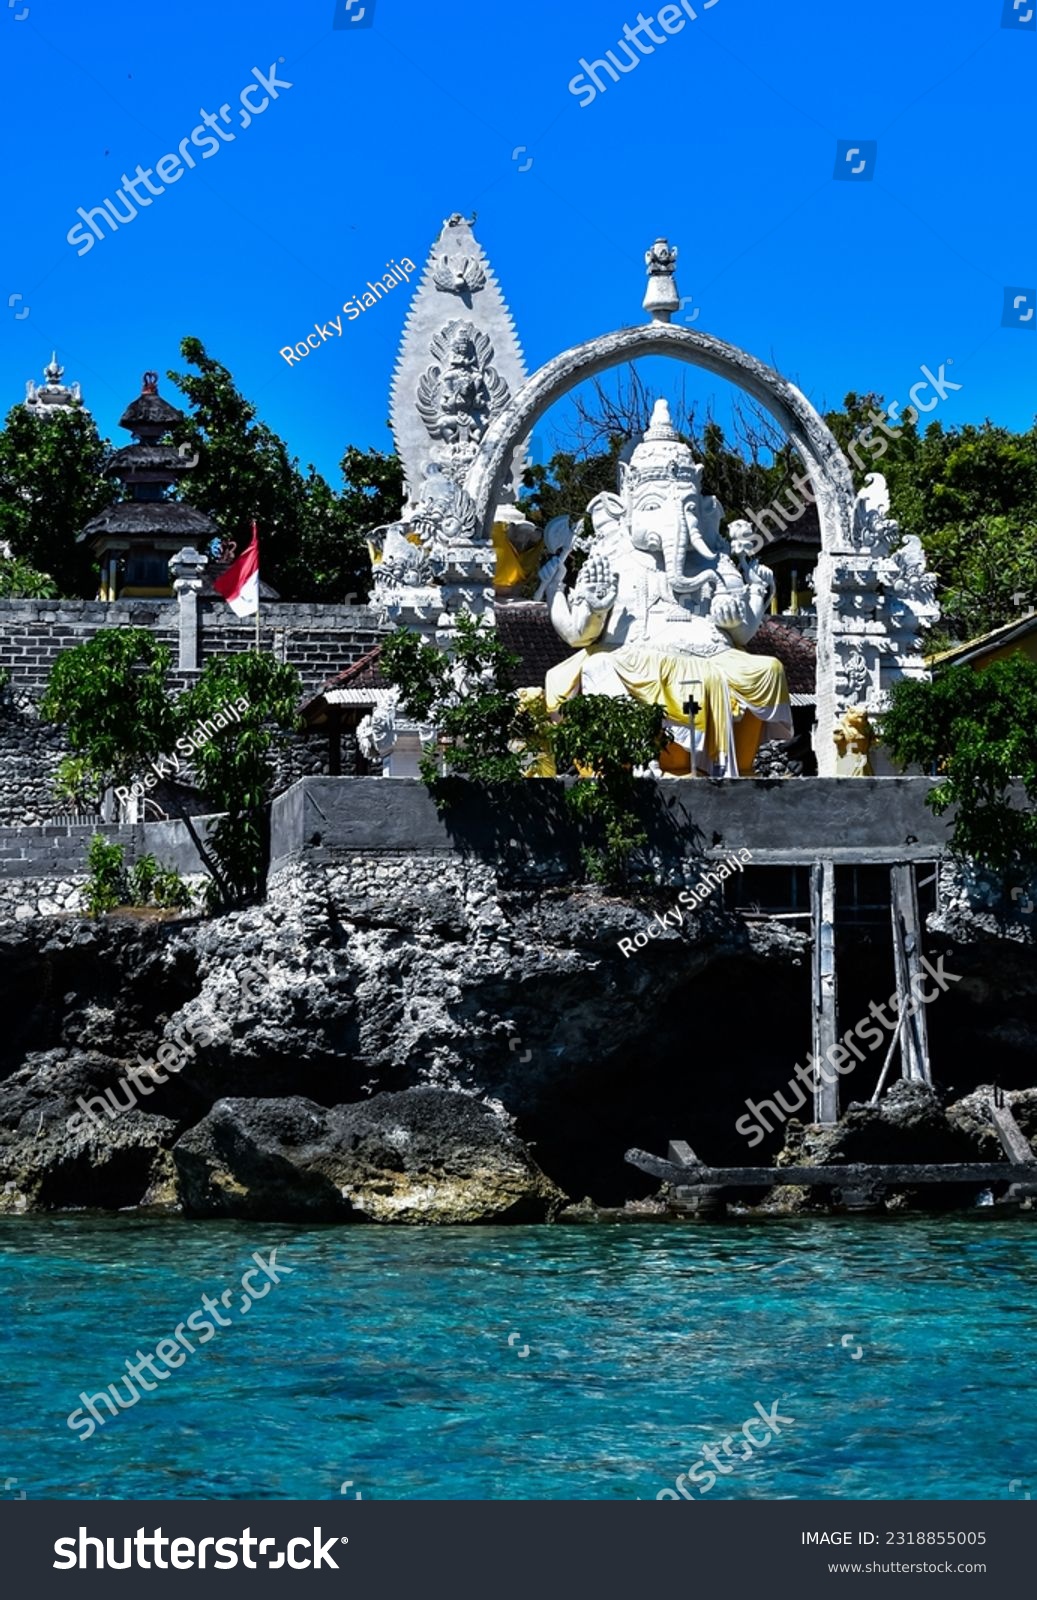 Ganesha statue at Menjangan island temple, West Bali, Indonesia. Blue sea water as foreground, clear blue sky as background  #2318855005